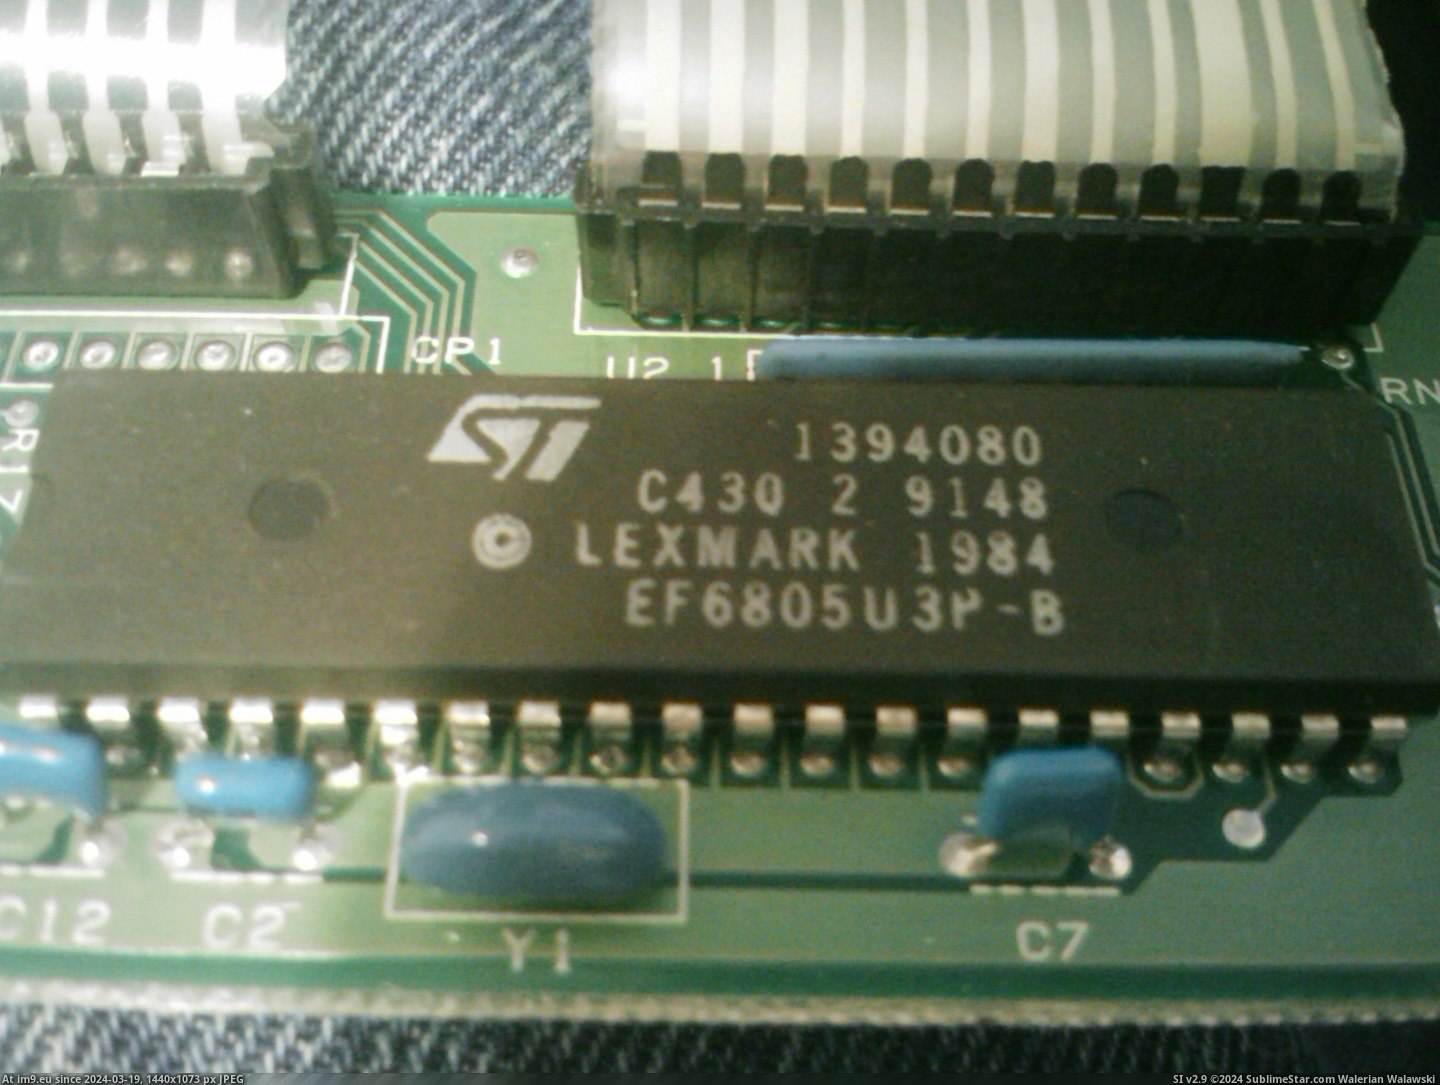 #Year #Week #Code #Reads #Lexmark #Chip #Keyboard #Existed [Mildlyinteresting] This chip inside my keyboard has a copyright year from before Lexmark existed. (Date Code reads 48st week of Pic. (Изображение из альбом My r/MILDLYINTERESTING favs))